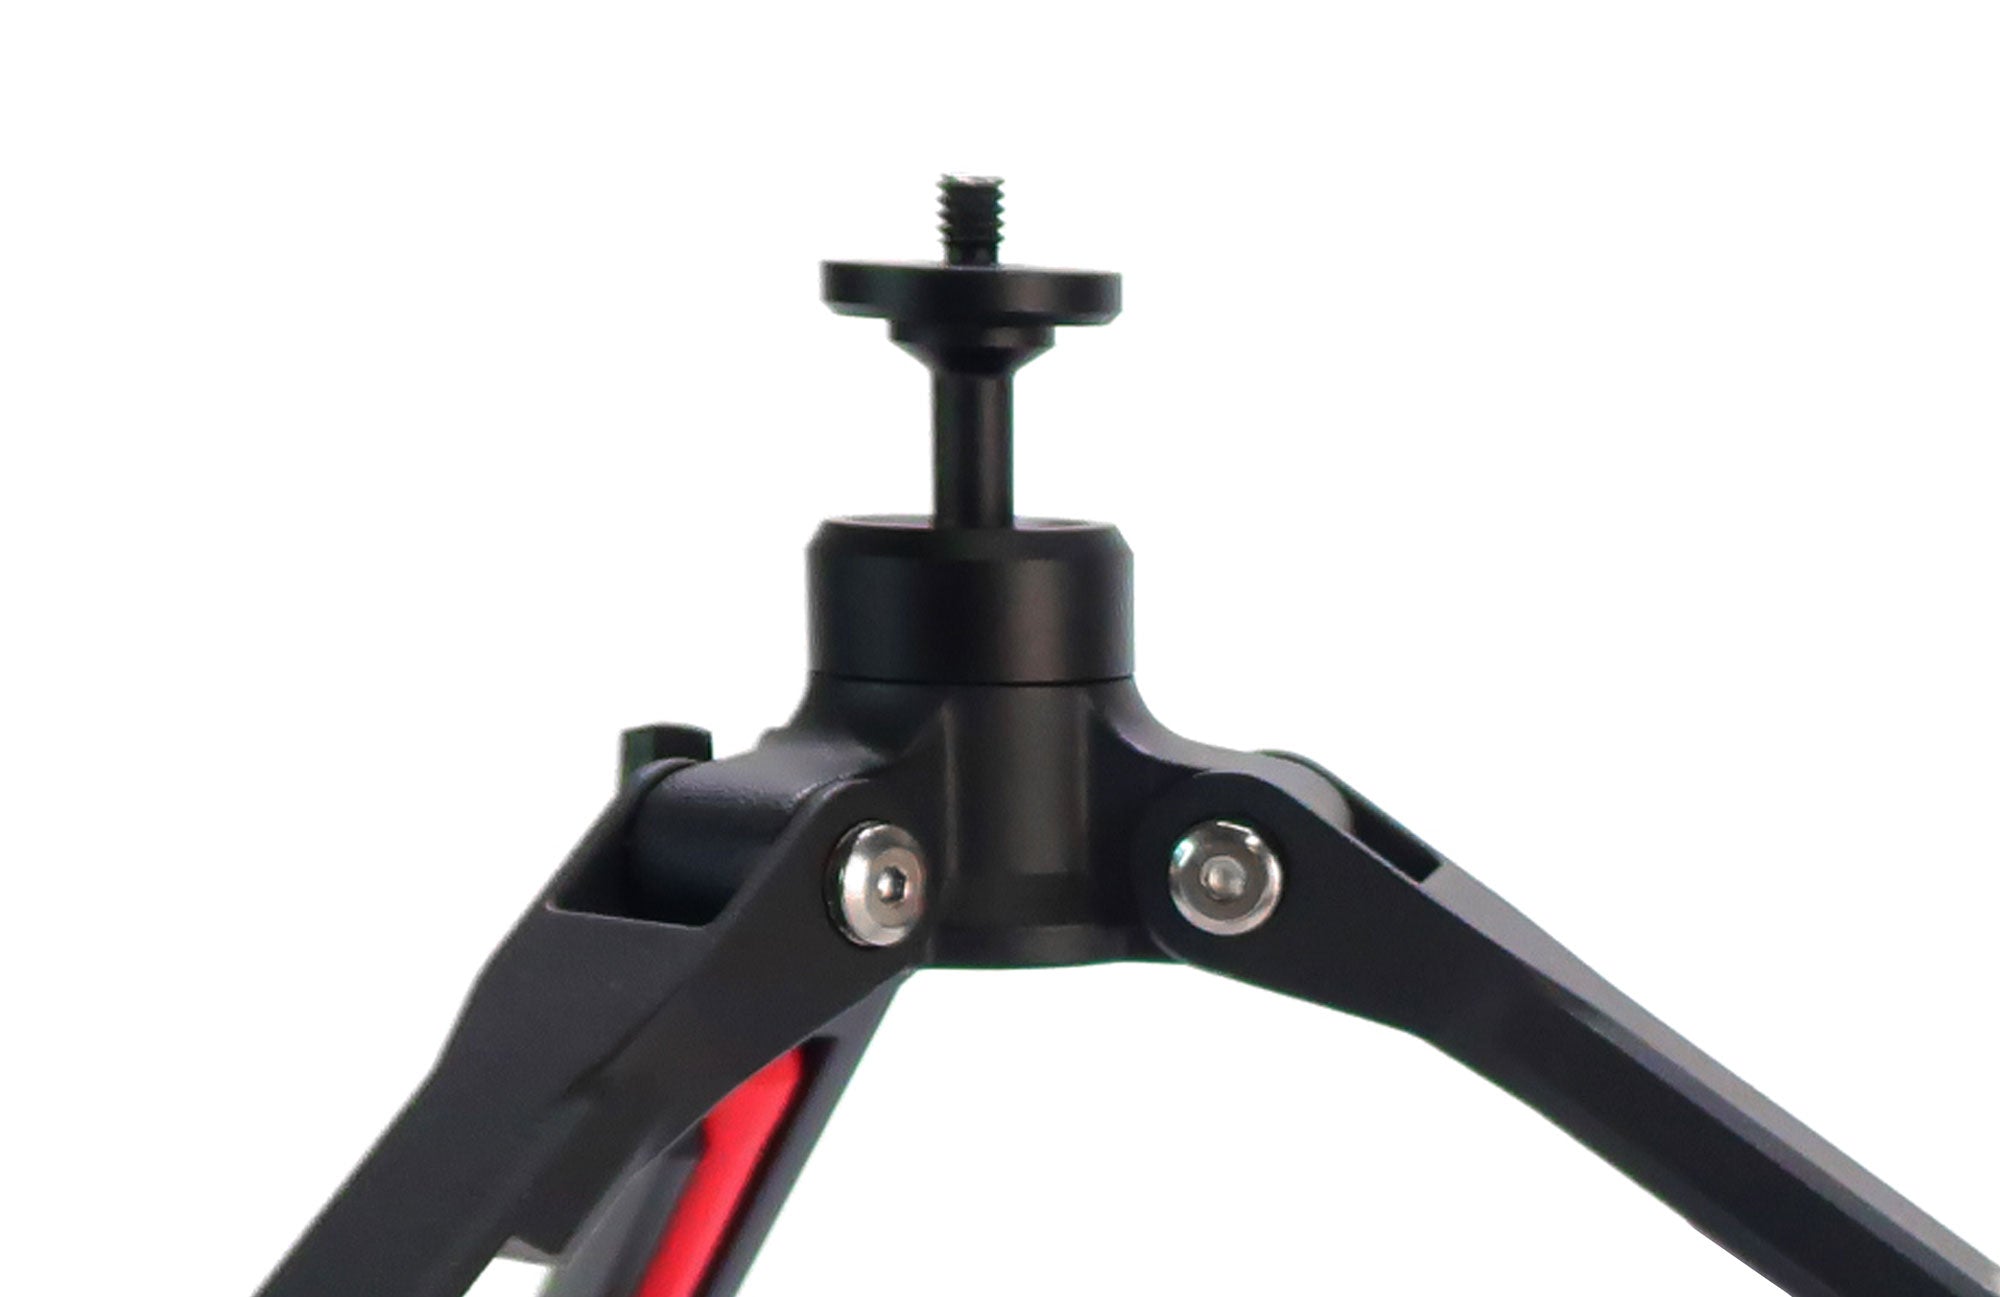 Leveling Ball Joint | FLi-PRO Telescoping Light by STKR Concepts